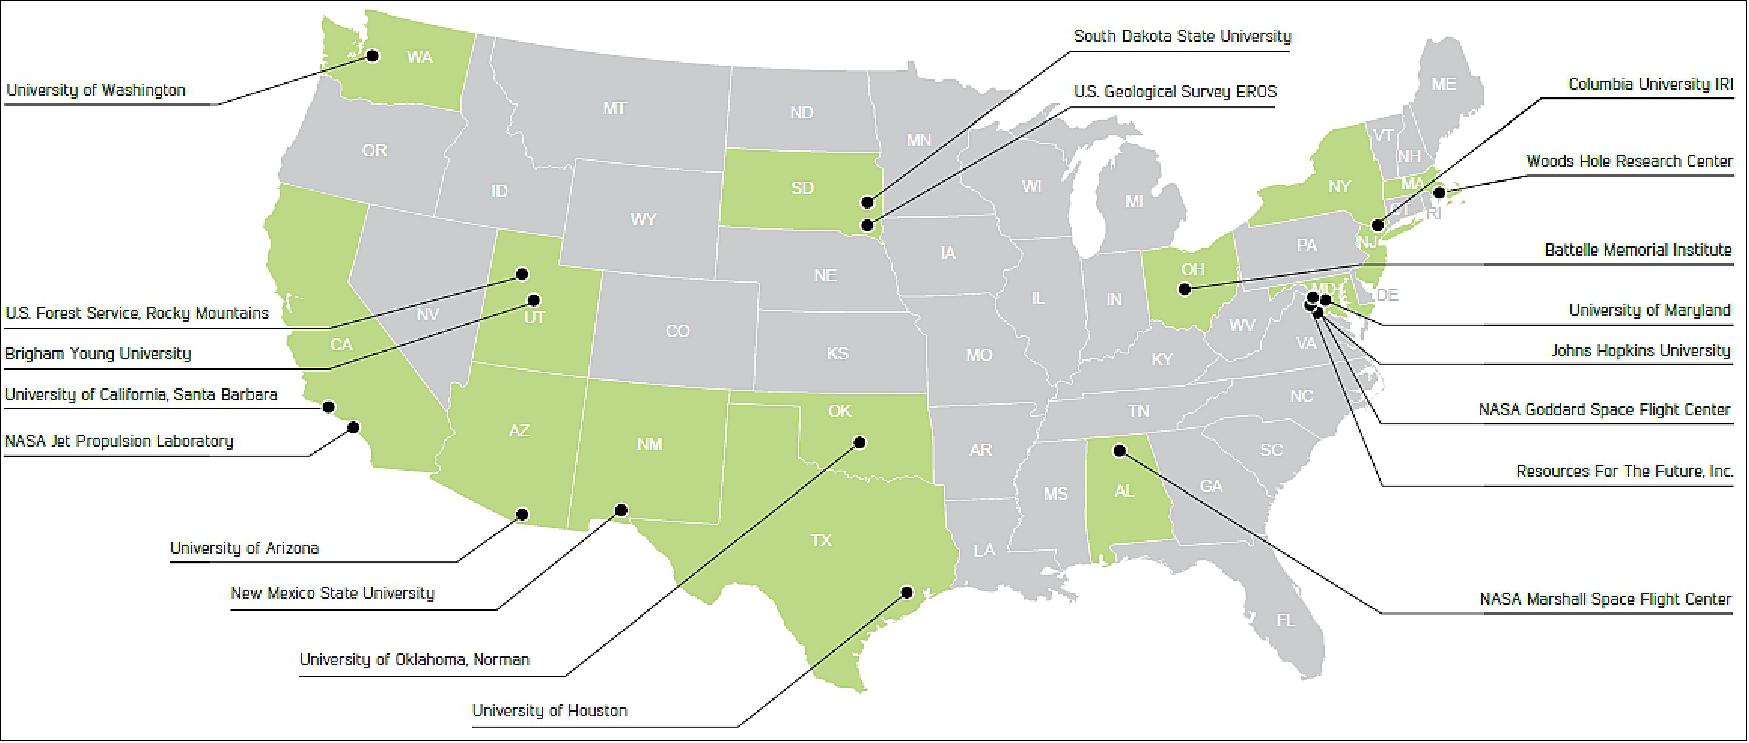 Figure 17: Research institutions collaborating with SERVIR across the United States (image credit: SERVIR Global)